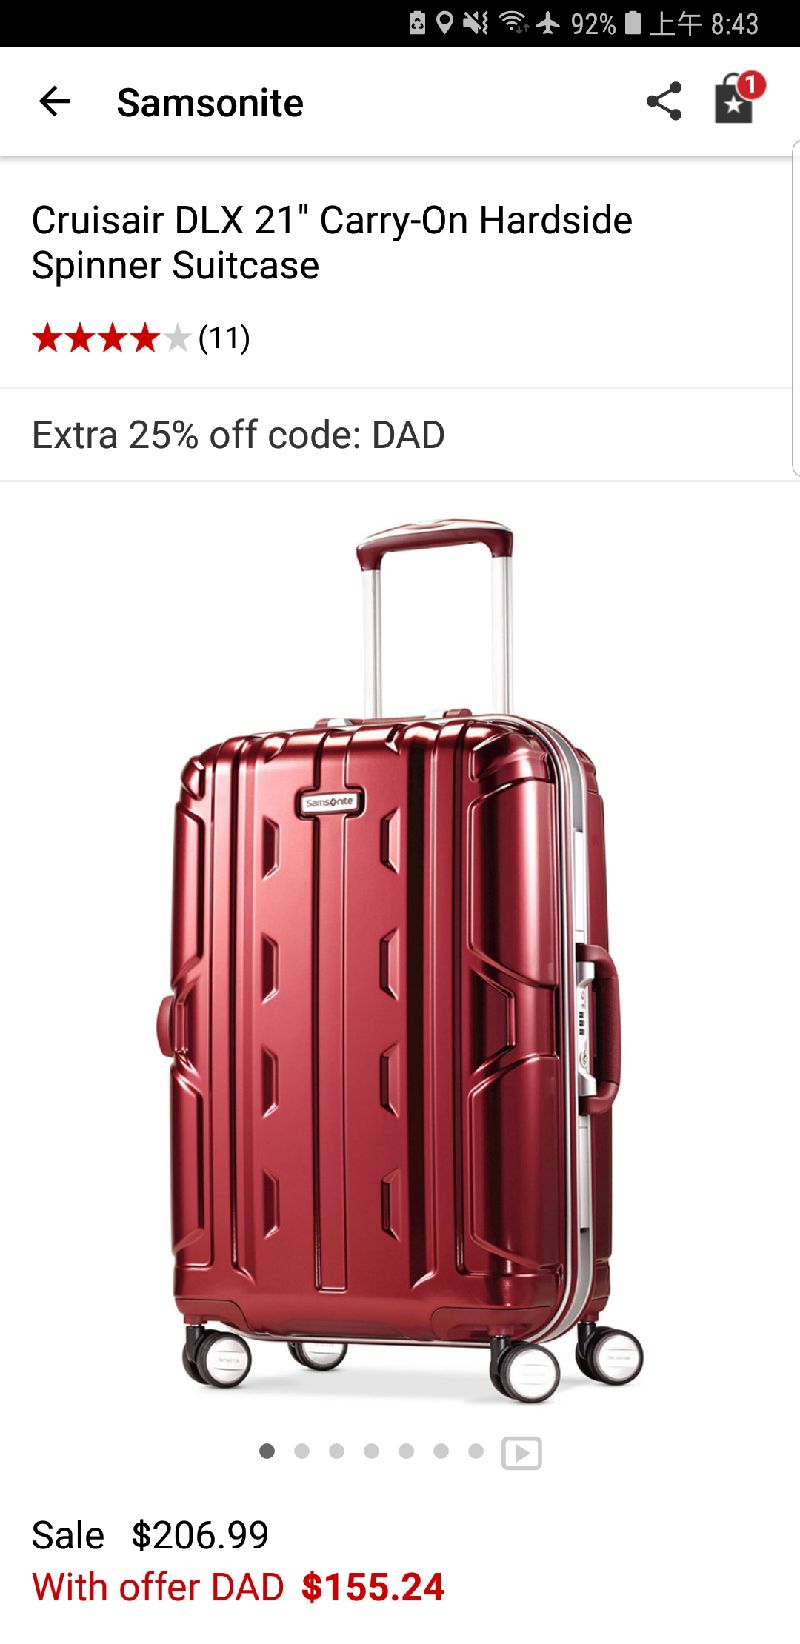 Samsonite Cruisair DLX 21" Carry-On Hardside Spinner Suitcase Luggage & Backpacks - Carry-On Luggage - Macy's行李箱